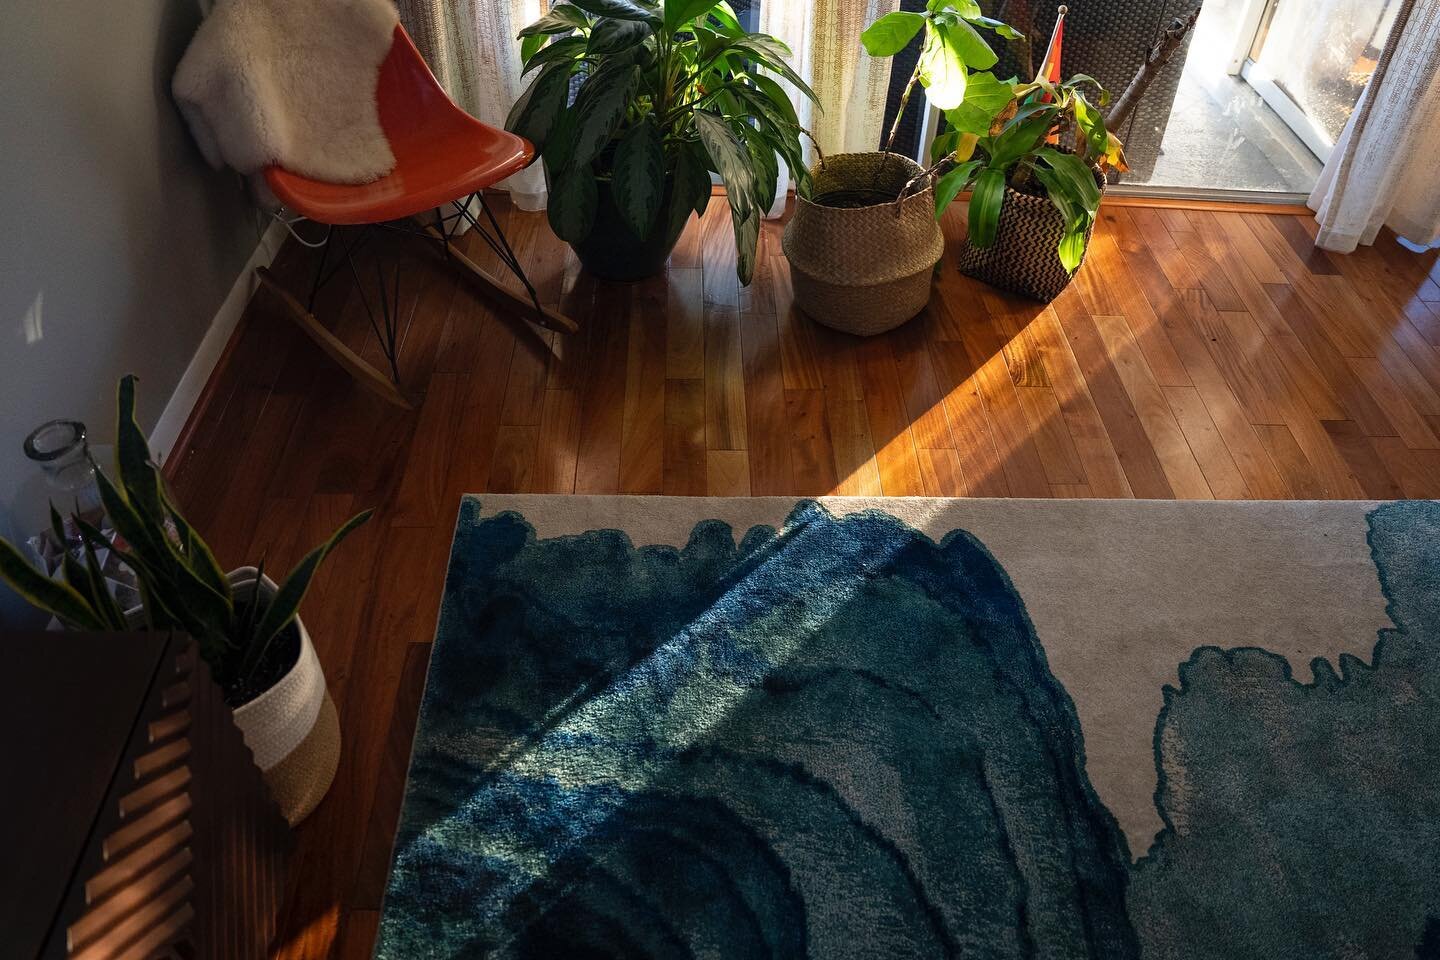 I watch enough HGTV to know we should have taken a before photo. So instead of a transformation reveal, here&rsquo;s a glimpse of our little living/dining room makeover as told through pretty morning light.